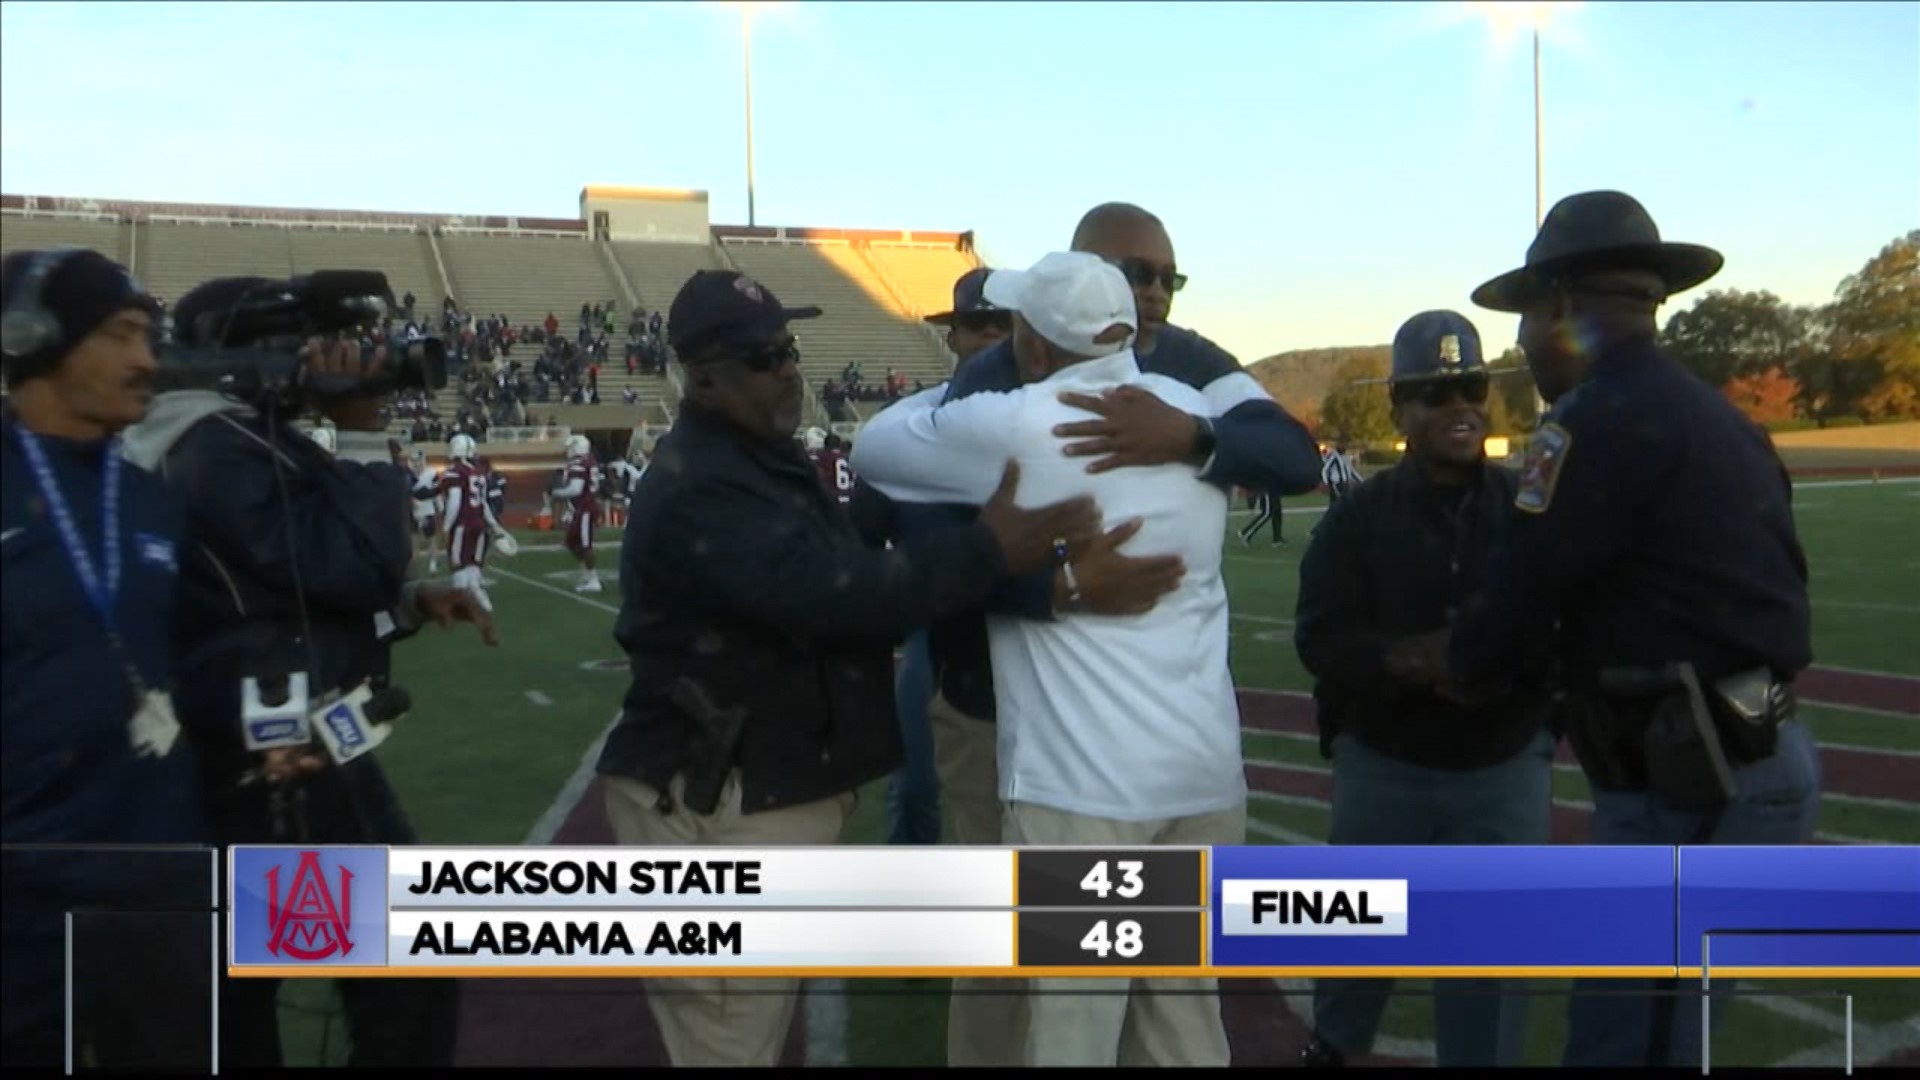 Aqeel Glass threw four touchdown passes, including two in the final four minutes, to rally Alabama A&M to a 48-43 victory over Jackson State on Saturday.